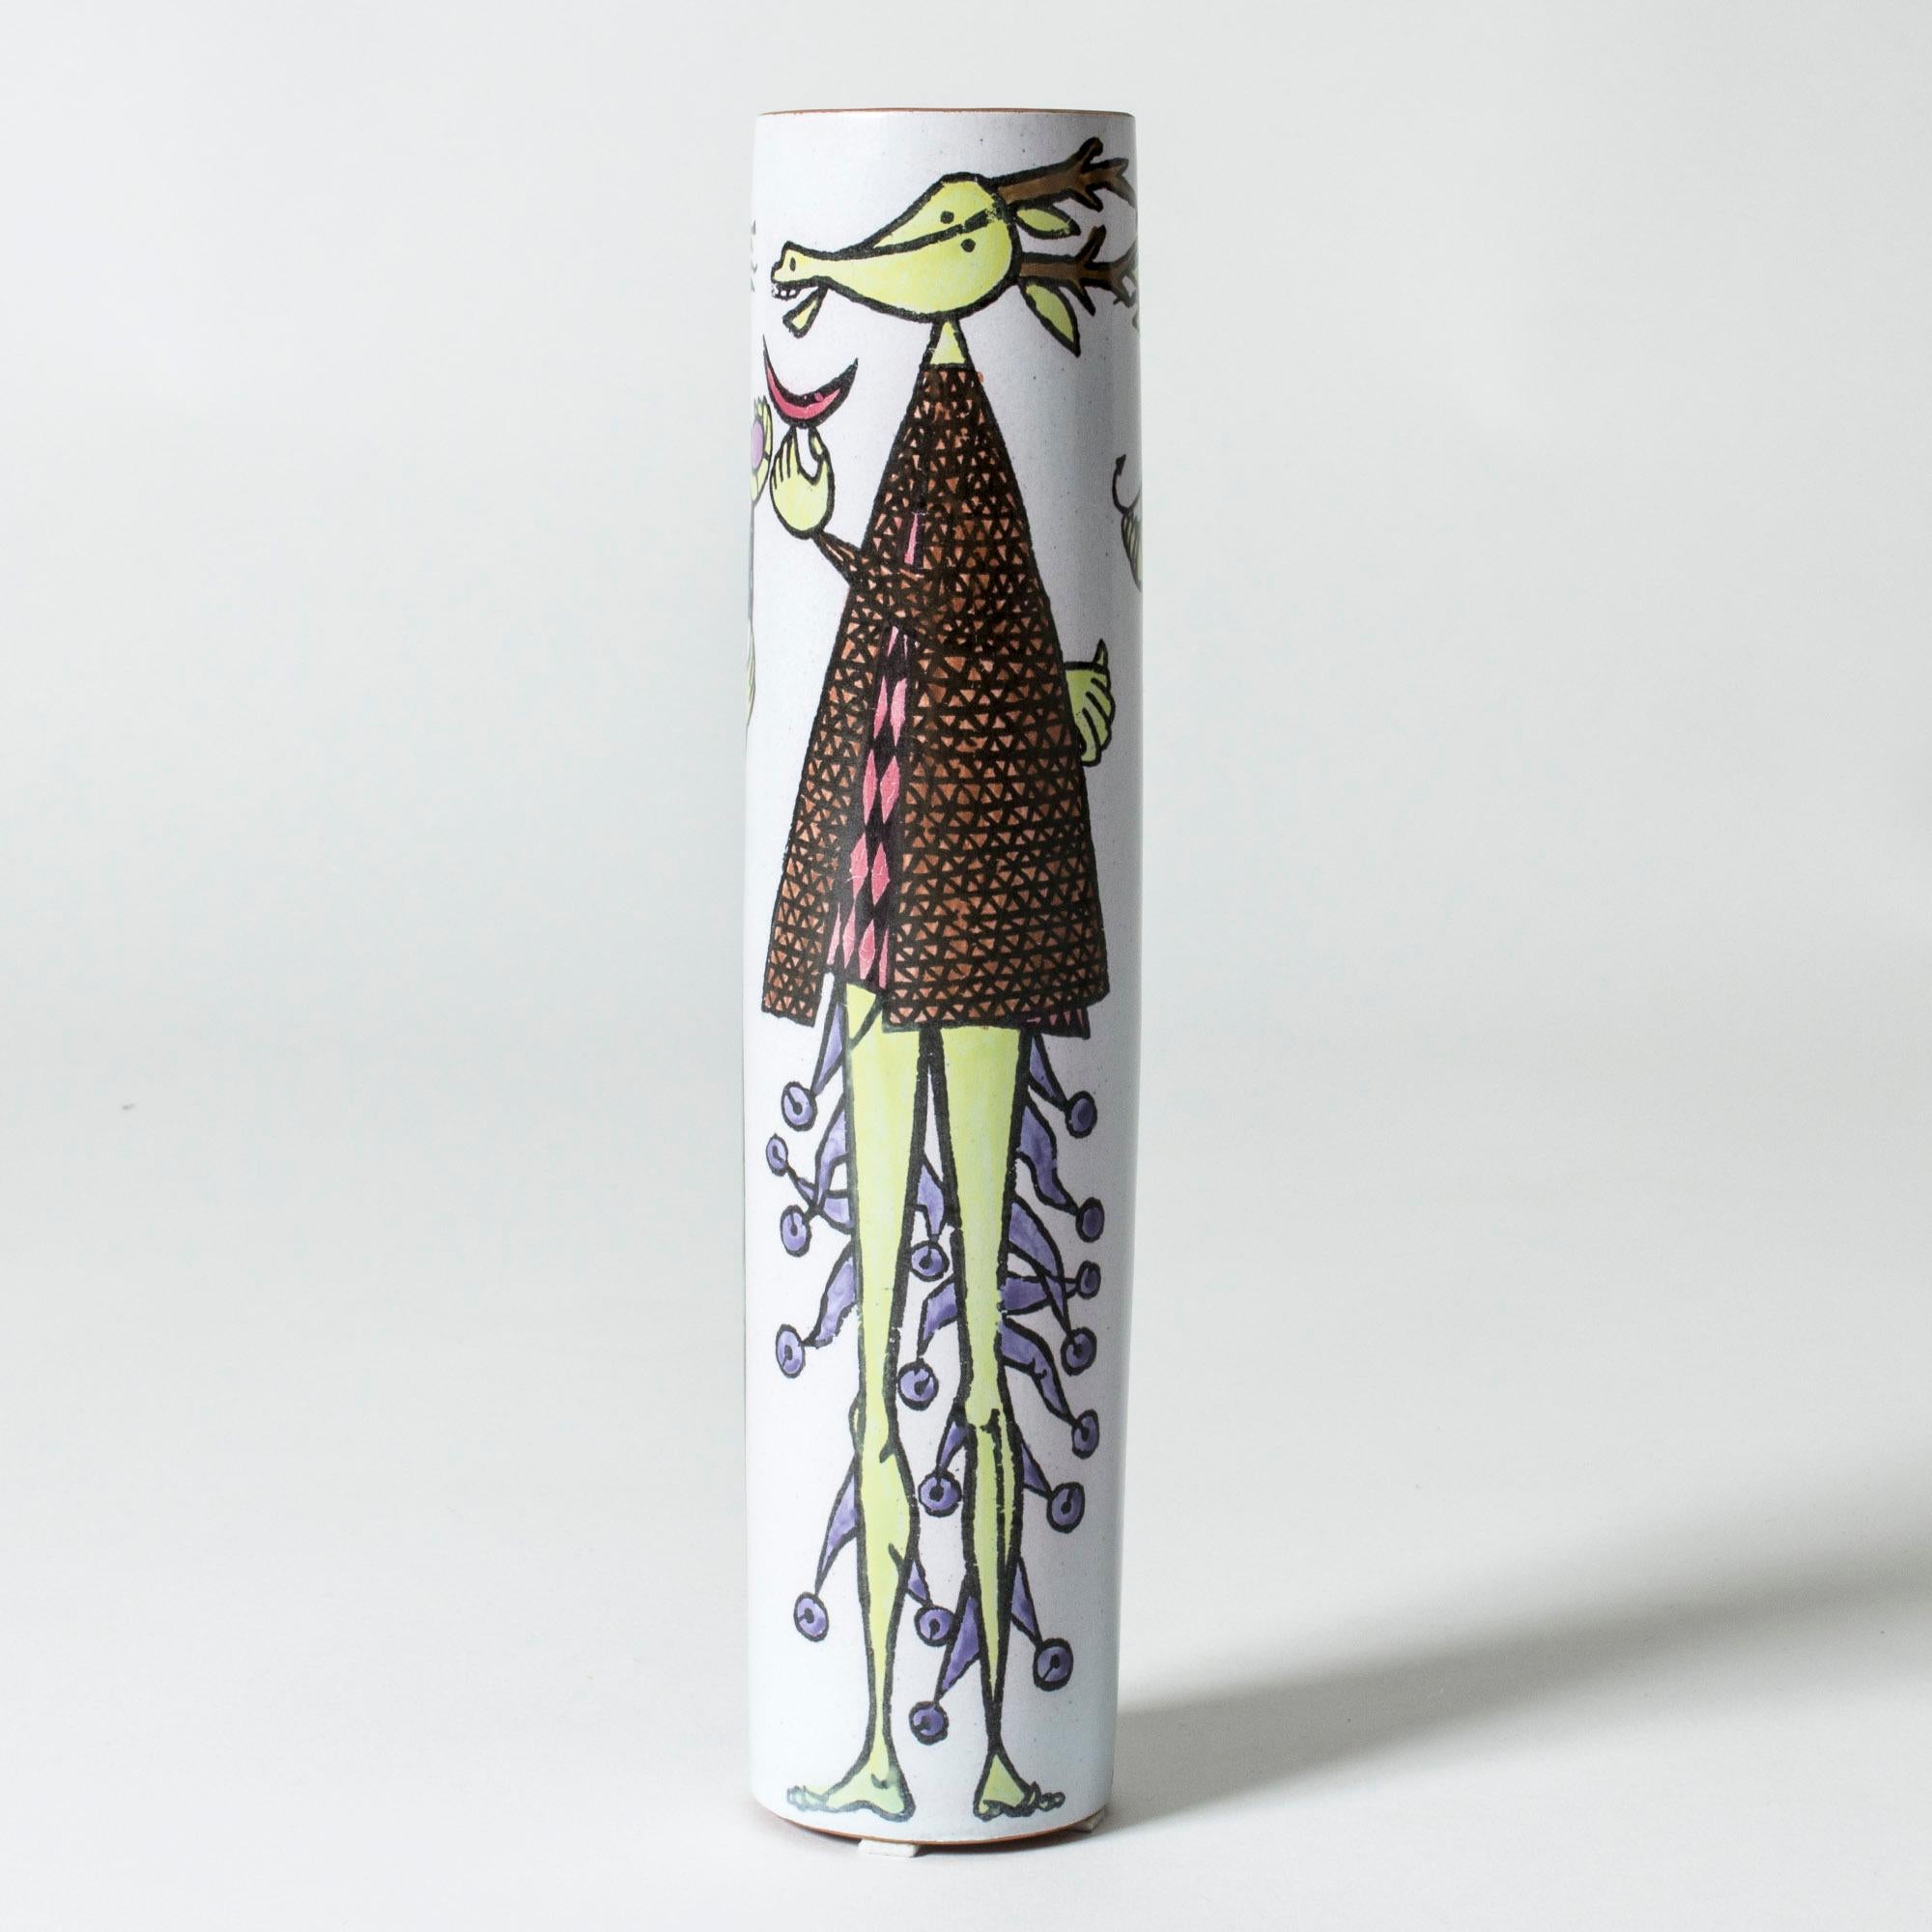 Faience “Karneval” vase by Stig Lindberg, in a long cylinder shape. Beautiful, playful motif of a three people in imaginative clothes. The rim is unglazed, giving an organic touch to the smooth design.

The “Karneval” series was produced from 1958